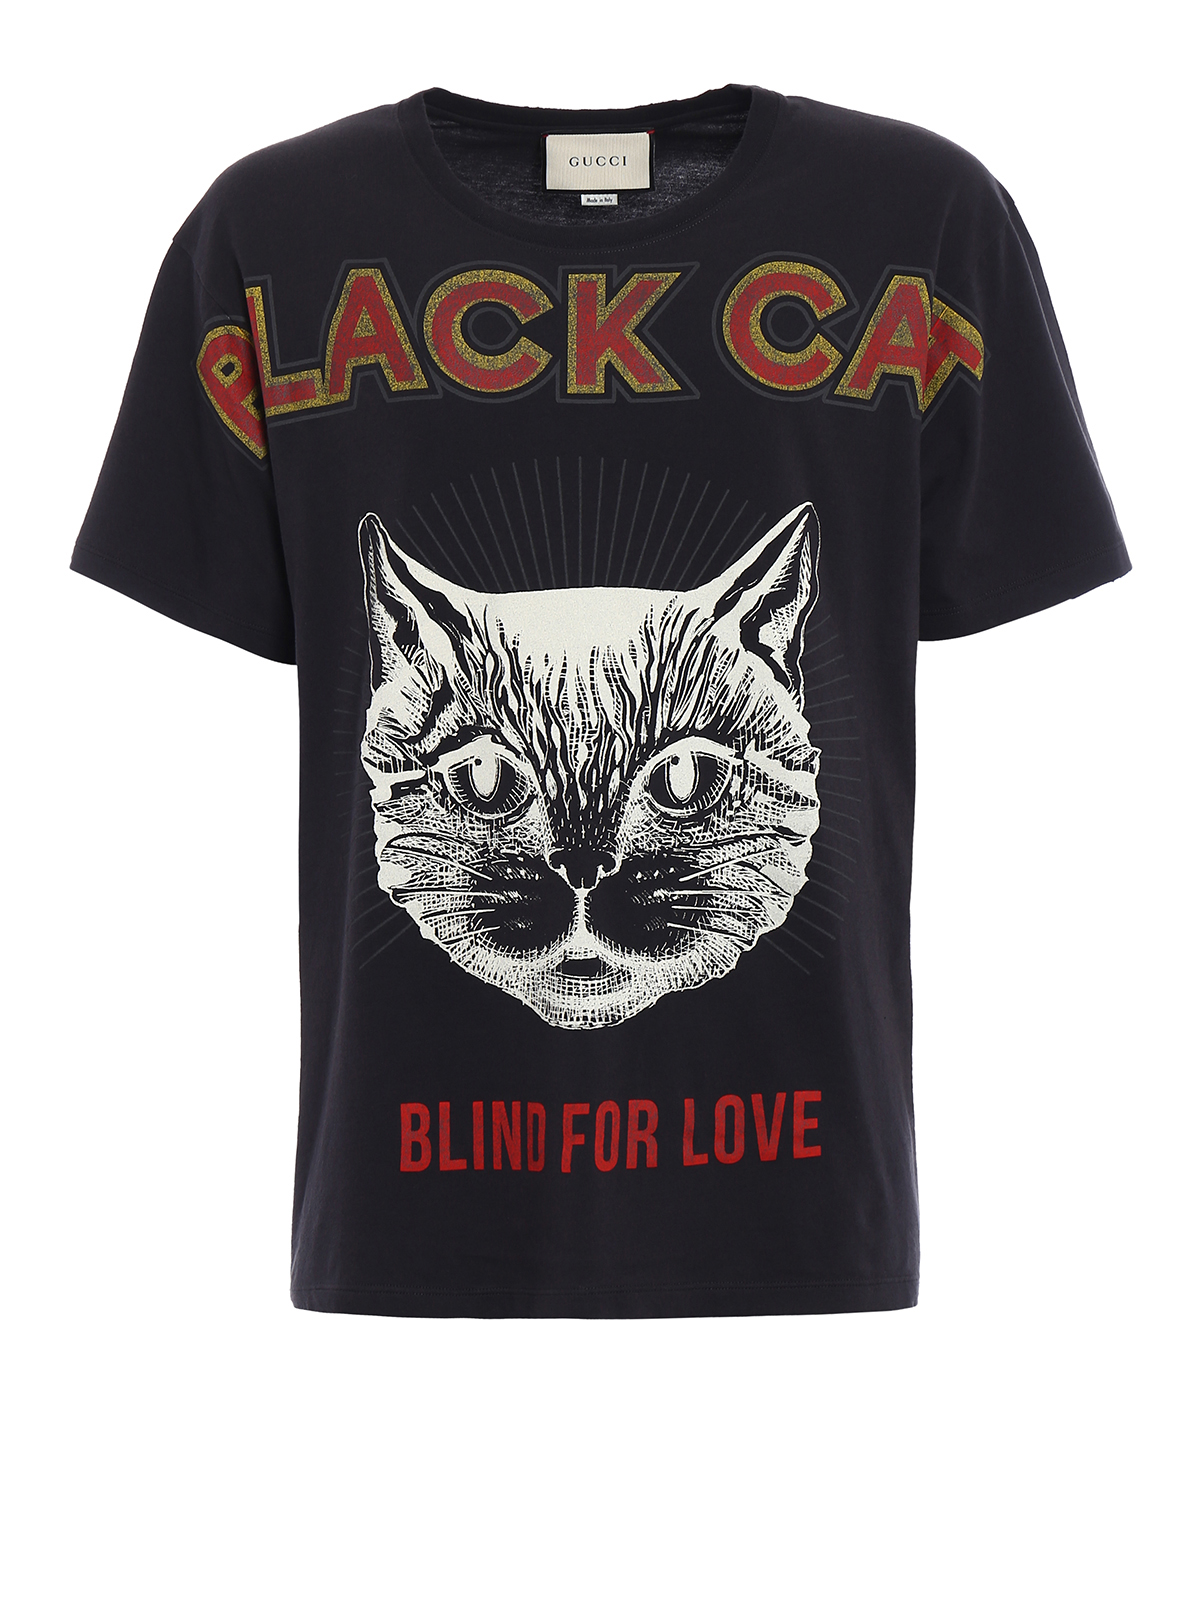 black cat blind for love gucci